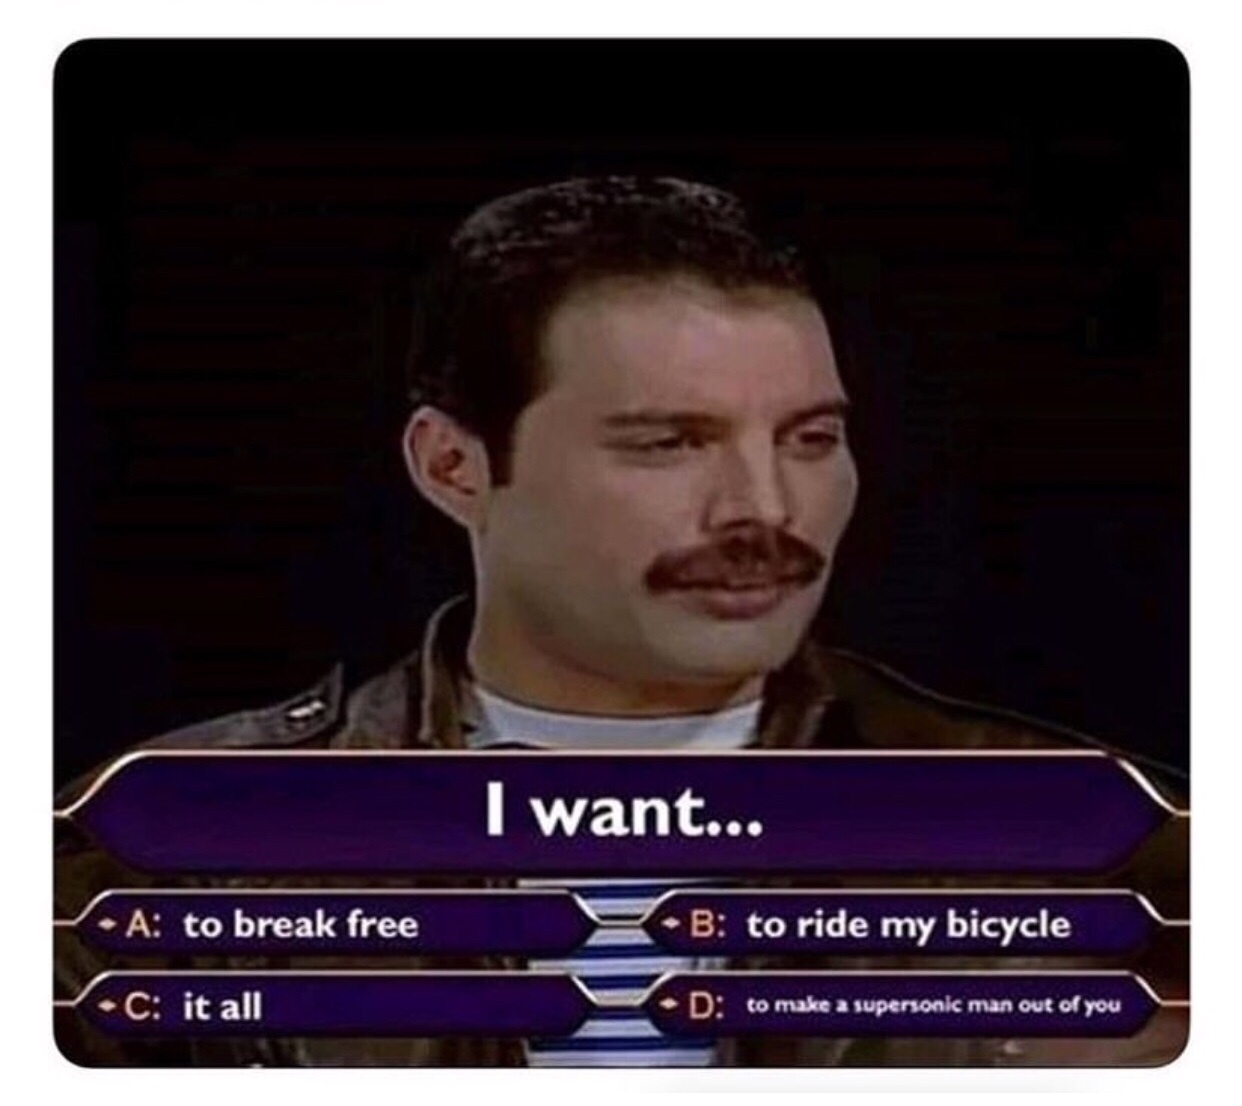 classic memes - I want... A to break free B to ride my bicycle C it all to make a supersonic man out of you